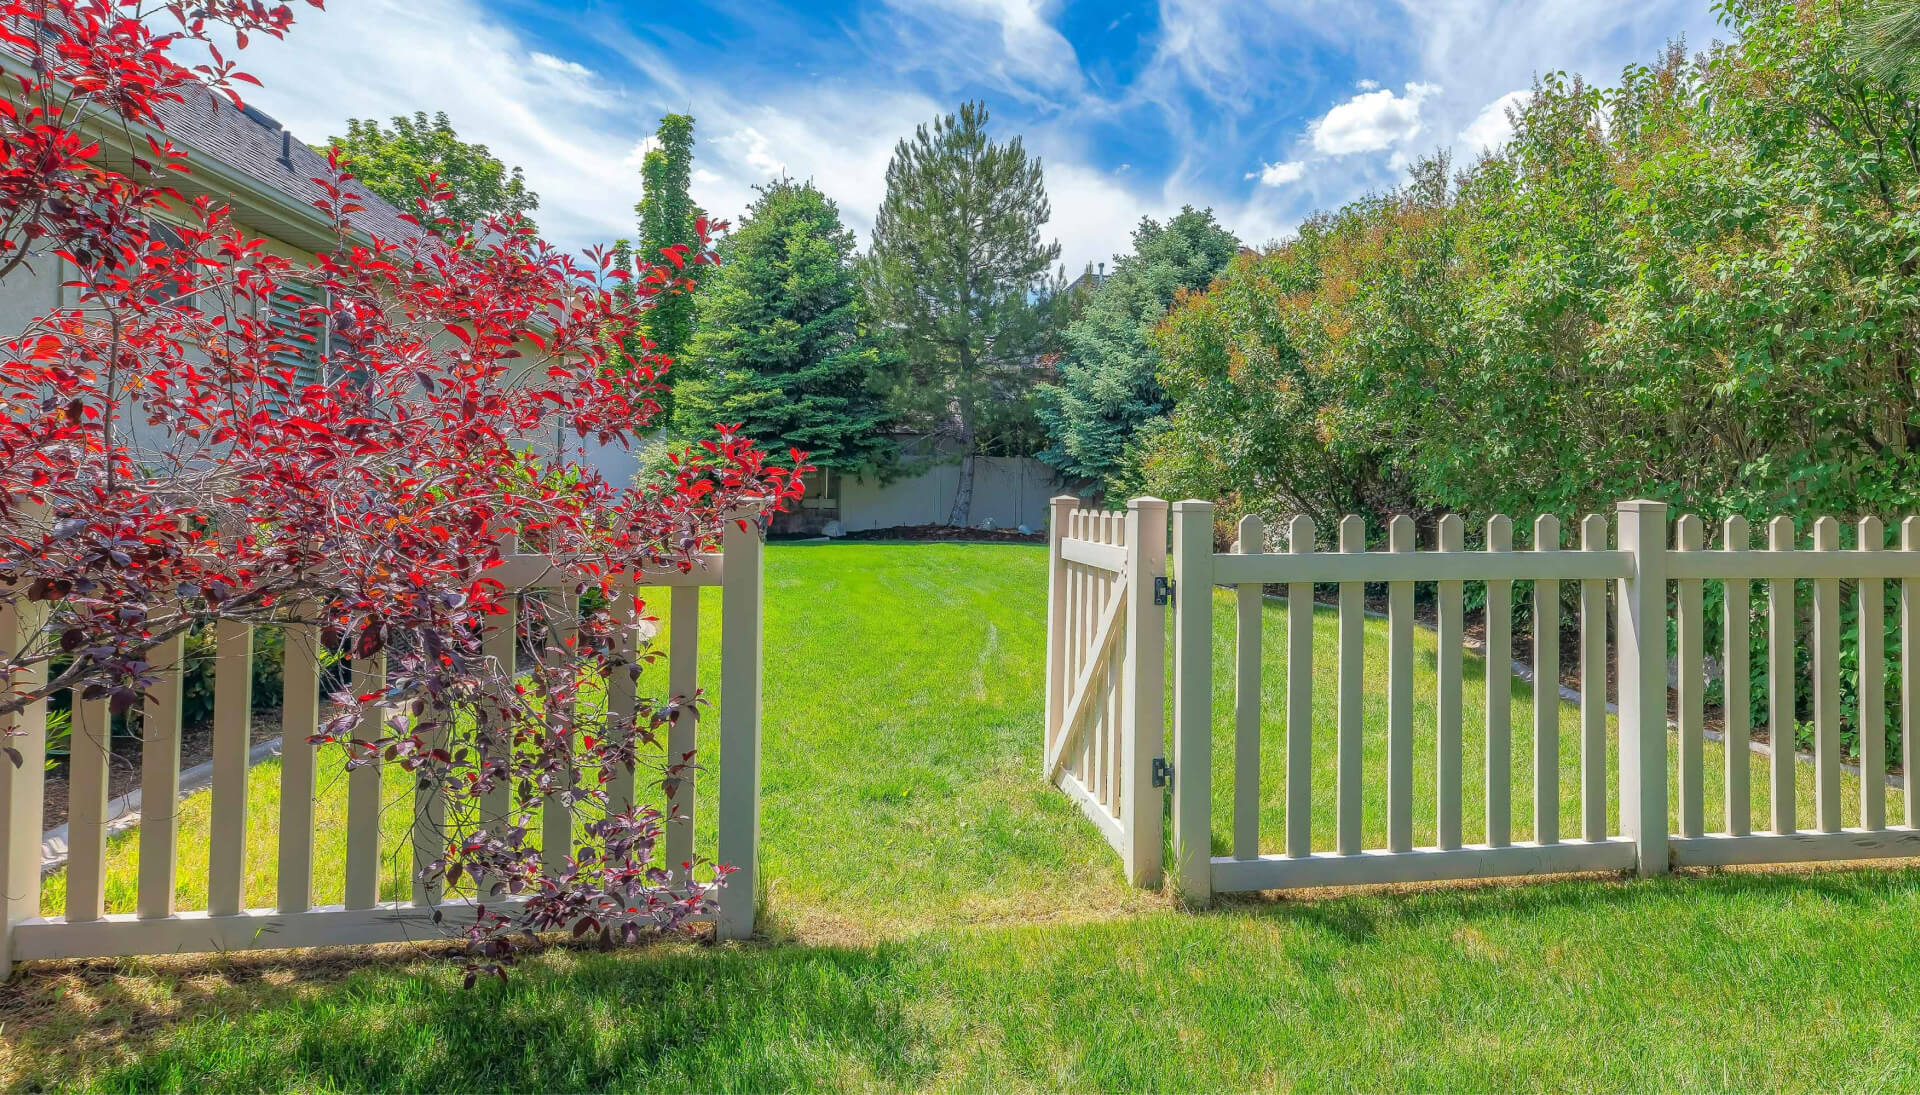 A functional fence gate providing access to a well-maintained backyard, surrounded by a wooden fence in Tacoma